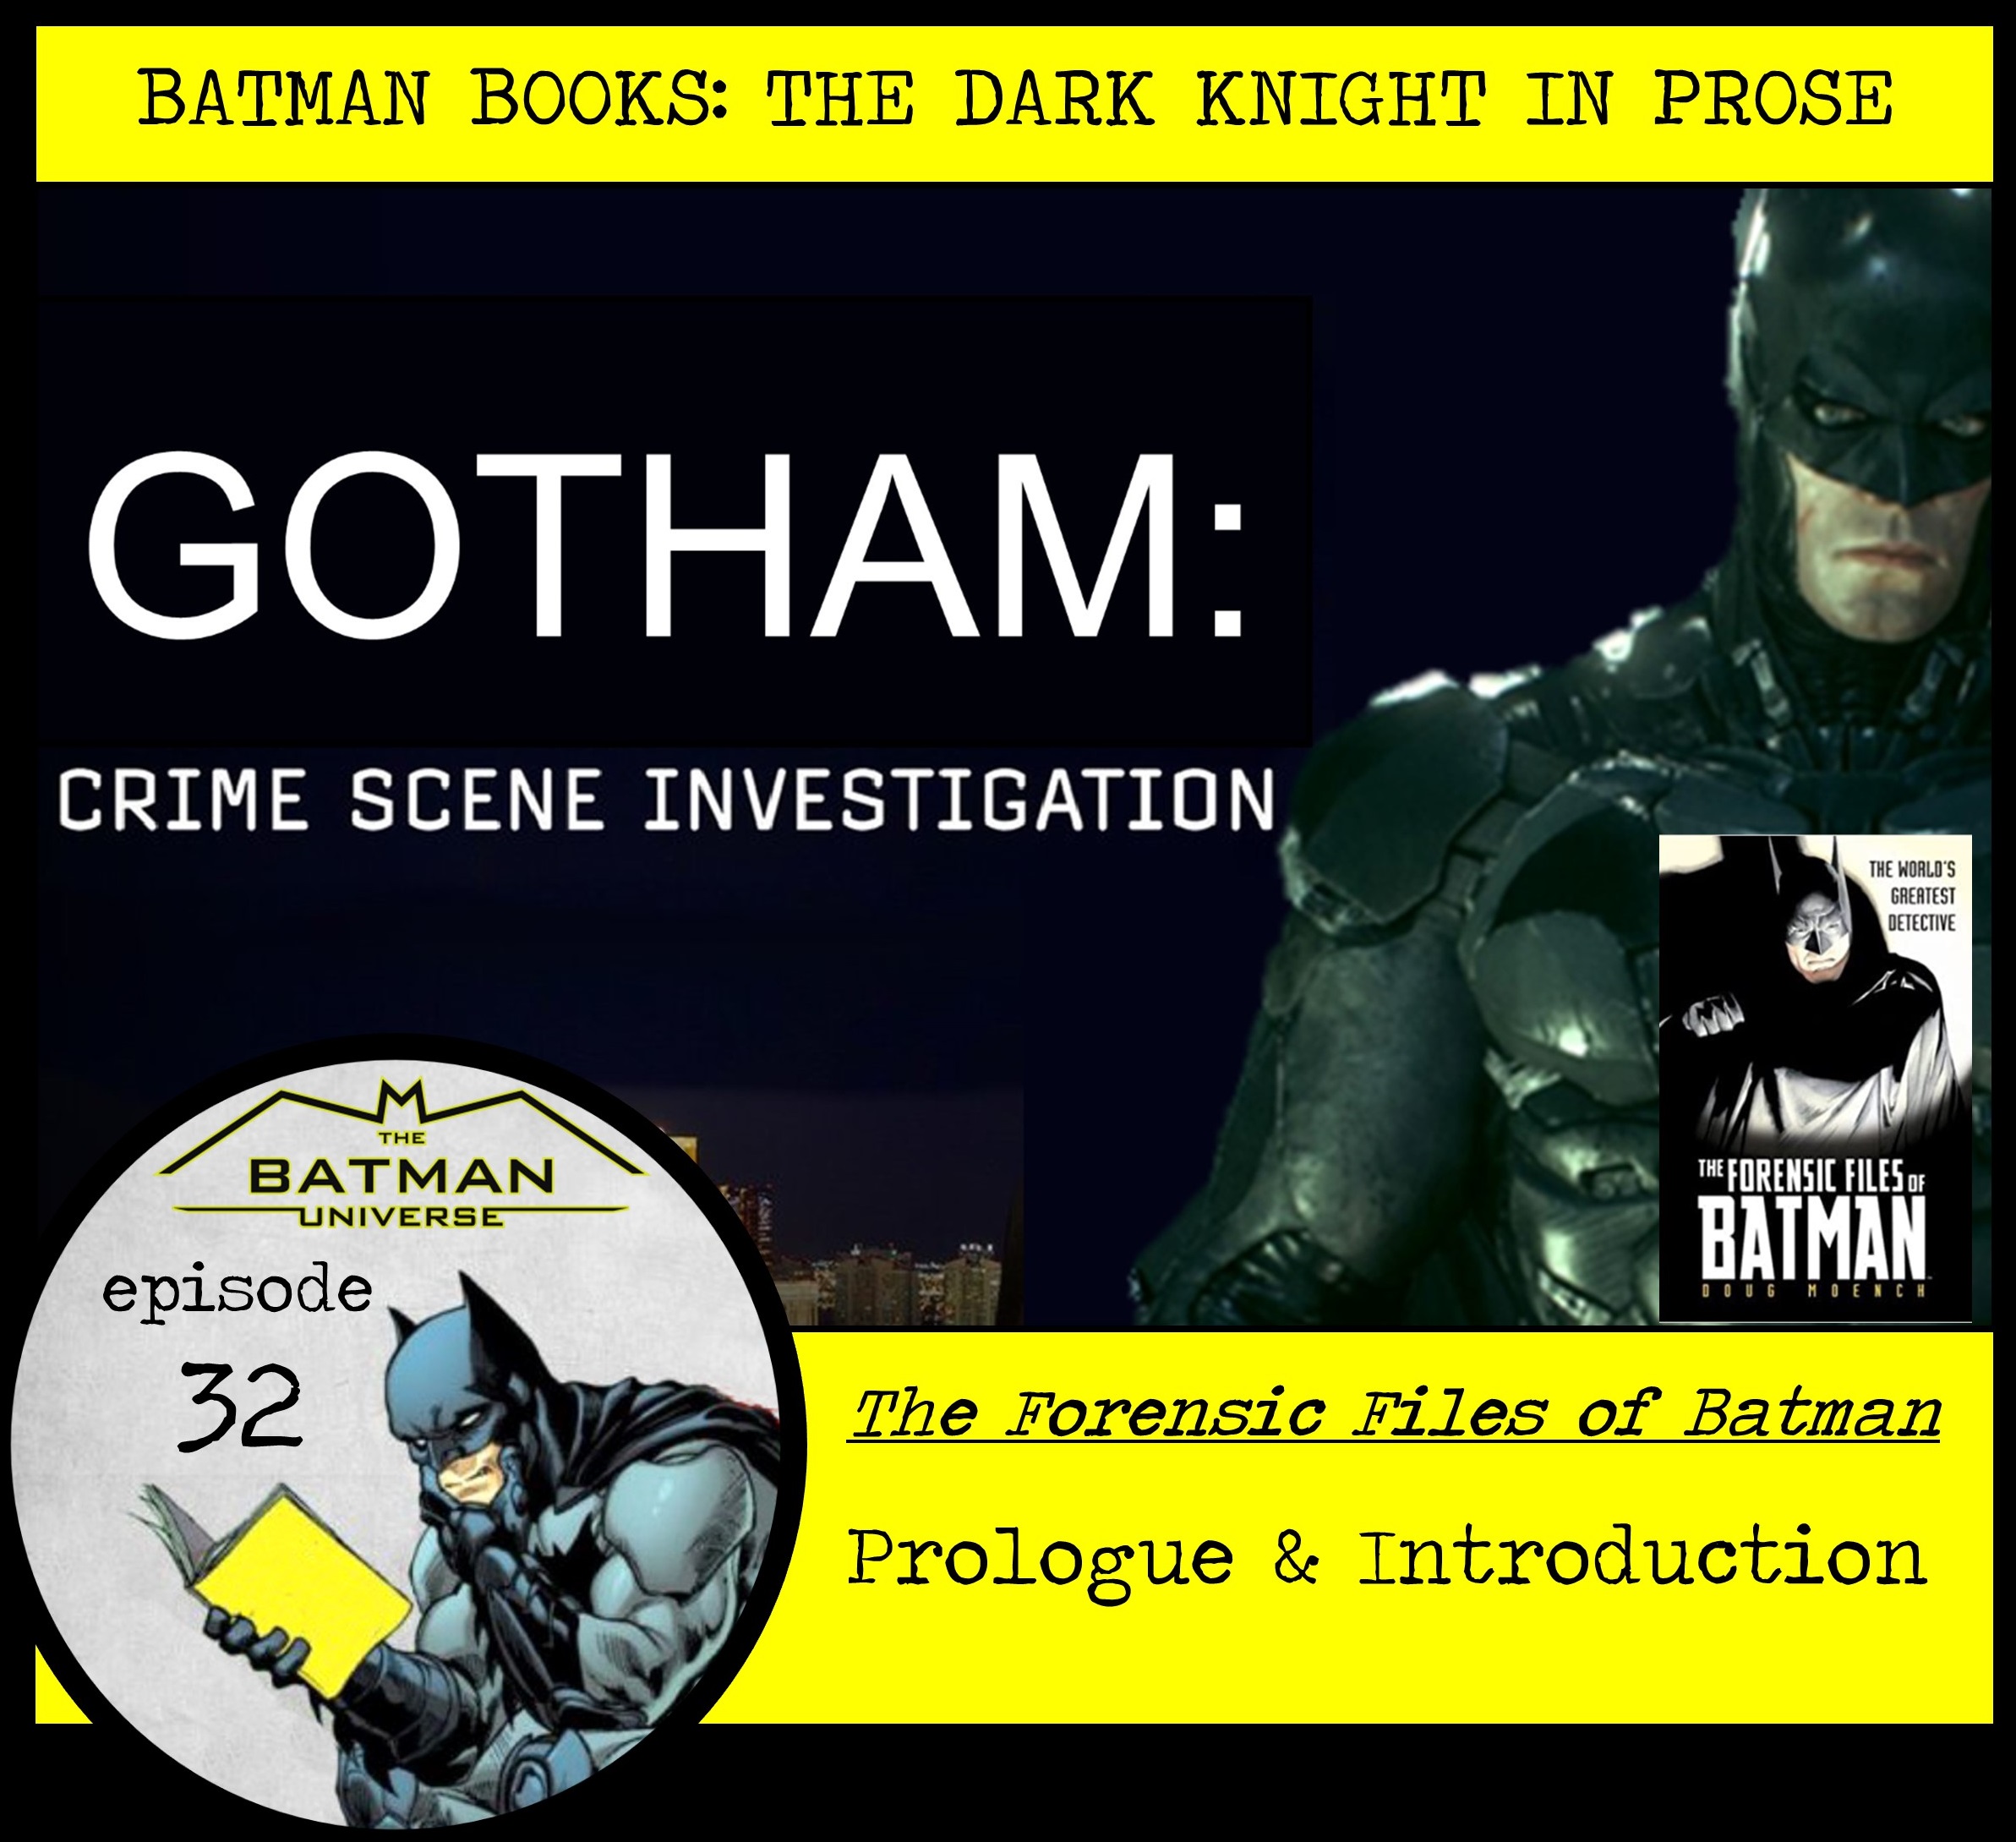 The Forensic Files of Batman Part 1